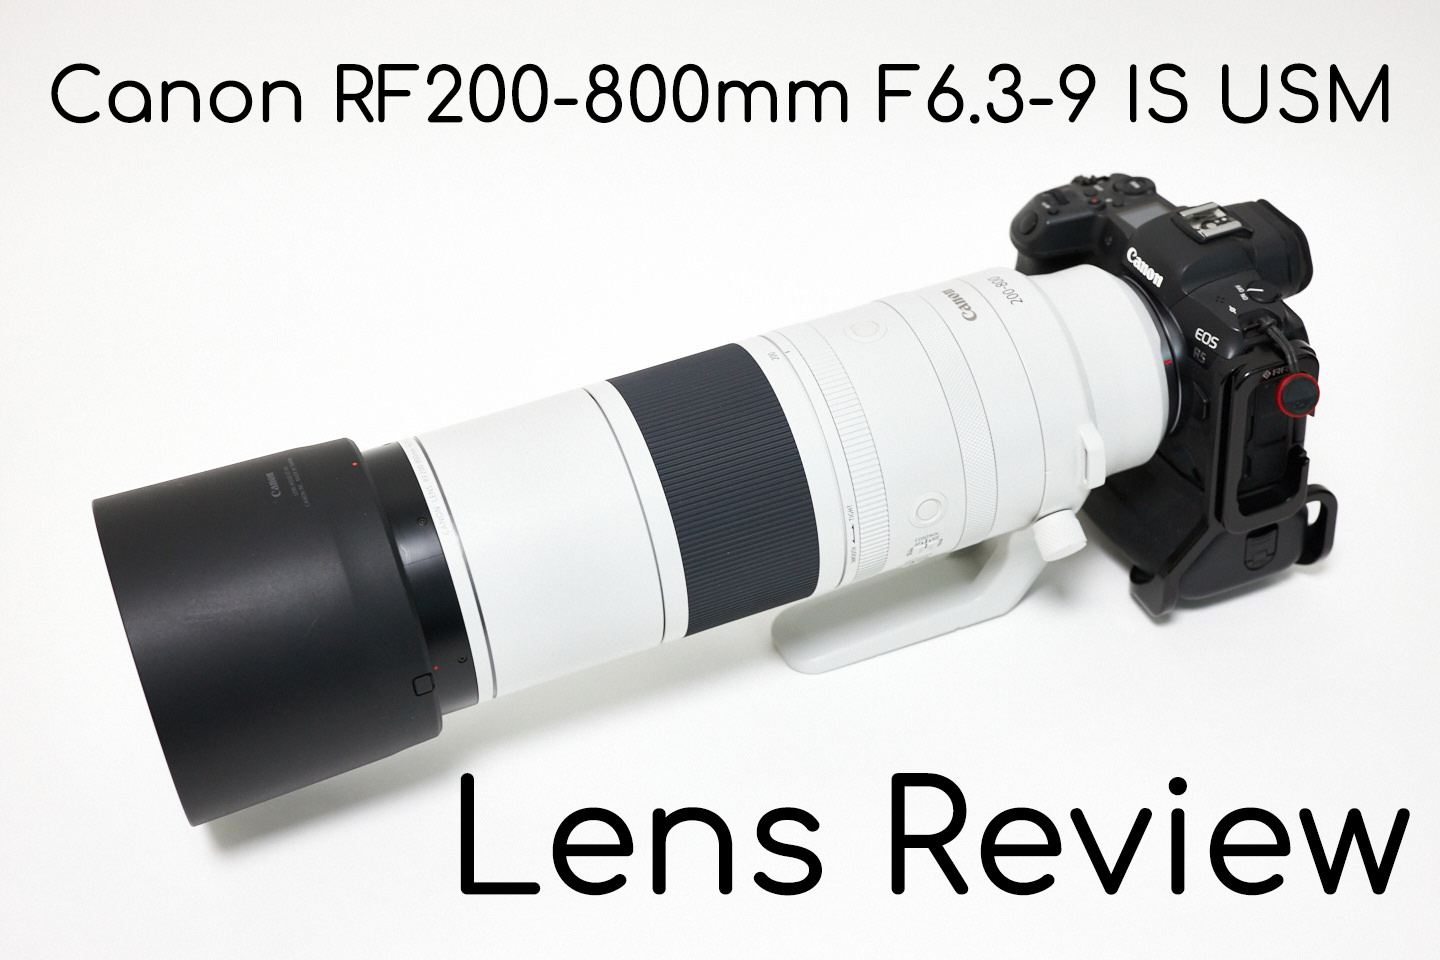 Canon RF200-800mm F6.3-9 IS USM Lens Review